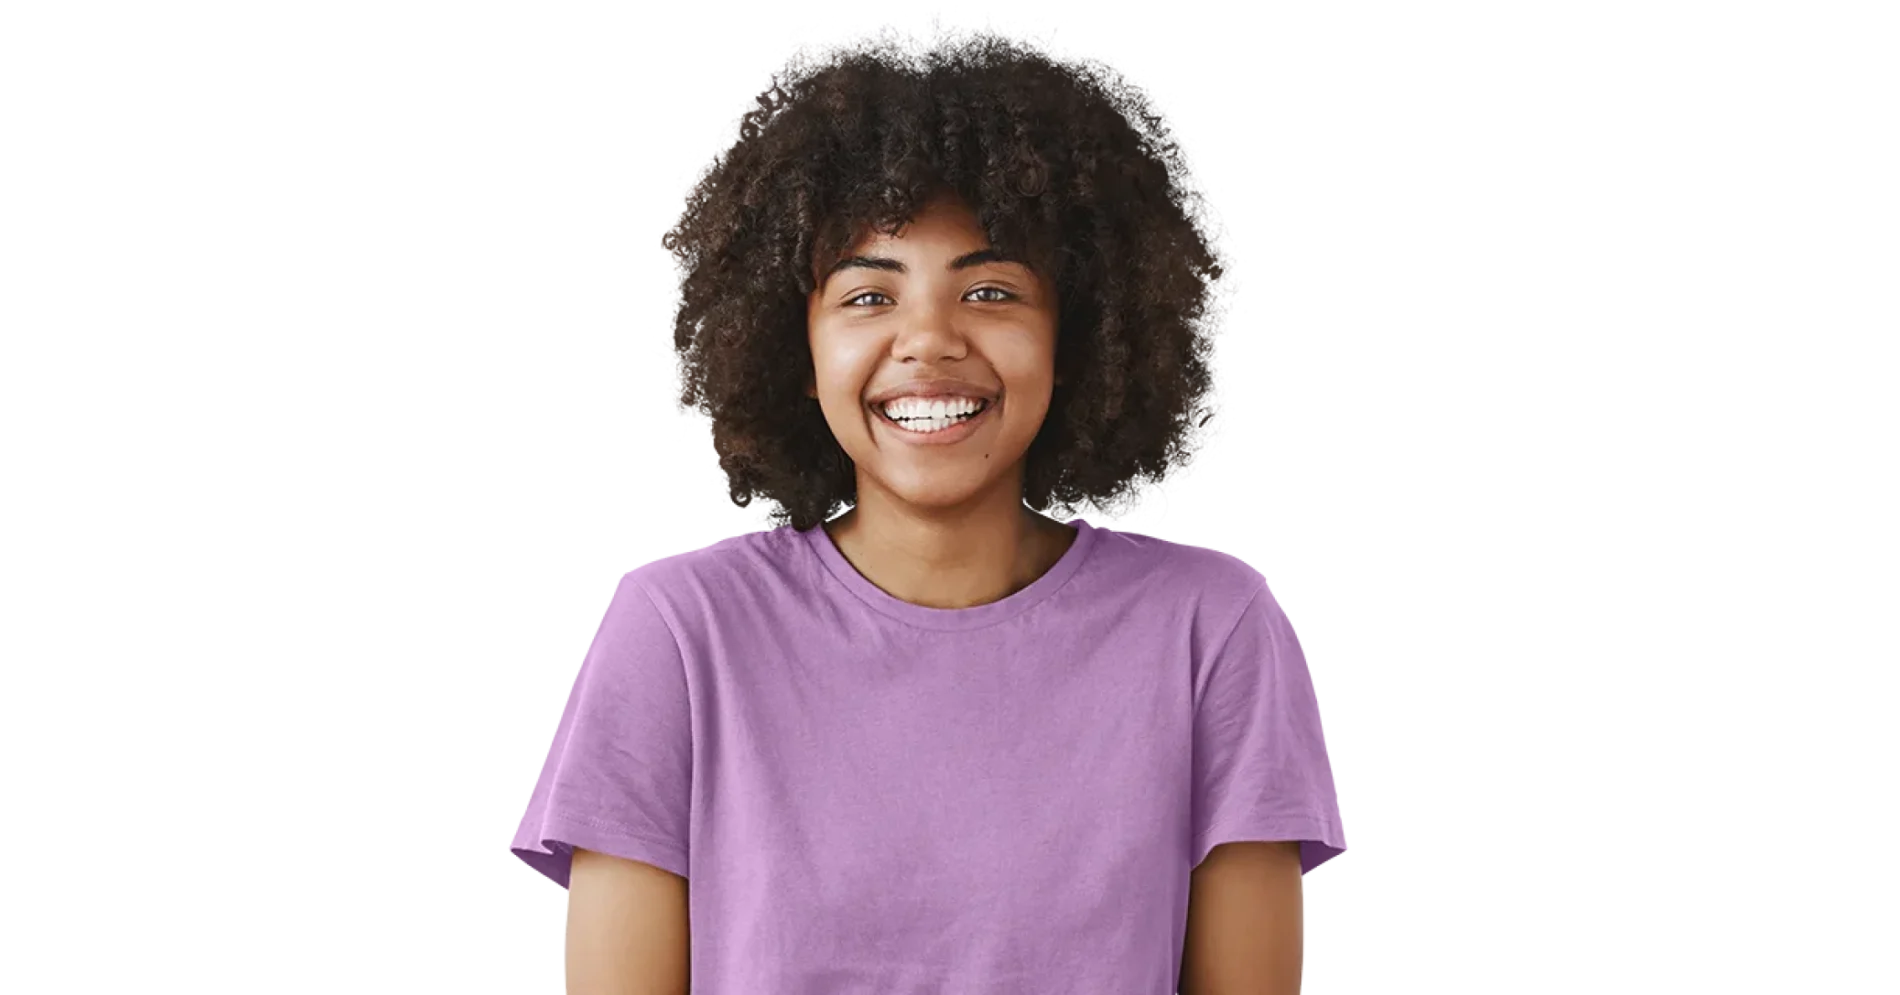 A smiling youth wearing a purple t-shirt.